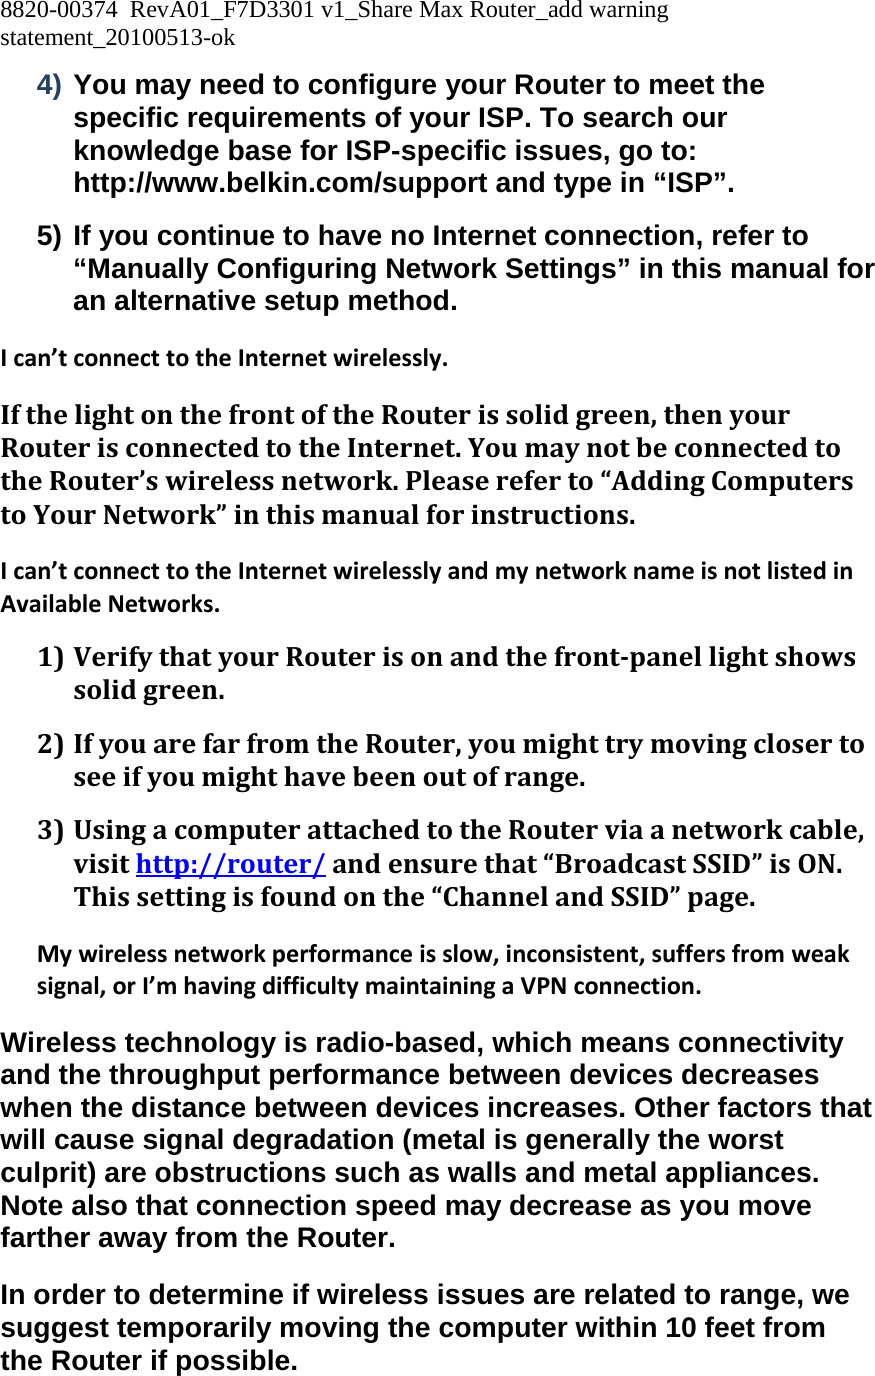 8820-00374  RevA01_F7D3301 v1_Share Max Router_add warning statement_20100513-ok  4) You may need to configure your Router to meet the specific requirements of your ISP. To search our knowledge base for ISP-specific issues, go to: http://www.belkin.com/support and type in “ISP”. 5) If you continue to have no Internet connection, refer to “Manually Configuring Network Settings” in this manual for an alternative setup method. Ican’tconnecttotheInternetwirelessly.IfthelightonthefrontoftheRouterissolidgreen,thenyourRouterisconnectedtotheInternet.YoumaynotbeconnectedtotheRouter’swirelessnetwork.Pleasereferto“AddingComputerstoYourNetwork”inthismanualforinstructions.Ican’tconnecttotheInternetwirelesslyandmynetworknameisnotlistedinAvailableNetworks.1) VerifythatyourRouterisonandthefrontpanellightshowssolidgreen.2) IfyouarefarfromtheRouter,youmighttrymovingclosertoseeifyoumighthavebeenoutofrange.3) UsingacomputerattachedtotheRouterviaanetworkcable,visithttp://router/andensurethat“BroadcastSSID”isON.Thissettingisfoundonthe“ChannelandSSID”page.Mywirelessnetworkperformanceisslow,inconsistent,suffersfromweaksignal,orI’mhavingdifficultymaintainingaVPNconnection.Wireless technology is radio-based, which means connectivity and the throughput performance between devices decreases when the distance between devices increases. Other factors that will cause signal degradation (metal is generally the worst culprit) are obstructions such as walls and metal appliances. Note also that connection speed may decrease as you move farther away from the Router. In order to determine if wireless issues are related to range, we suggest temporarily moving the computer within 10 feet from the Router if possible. 